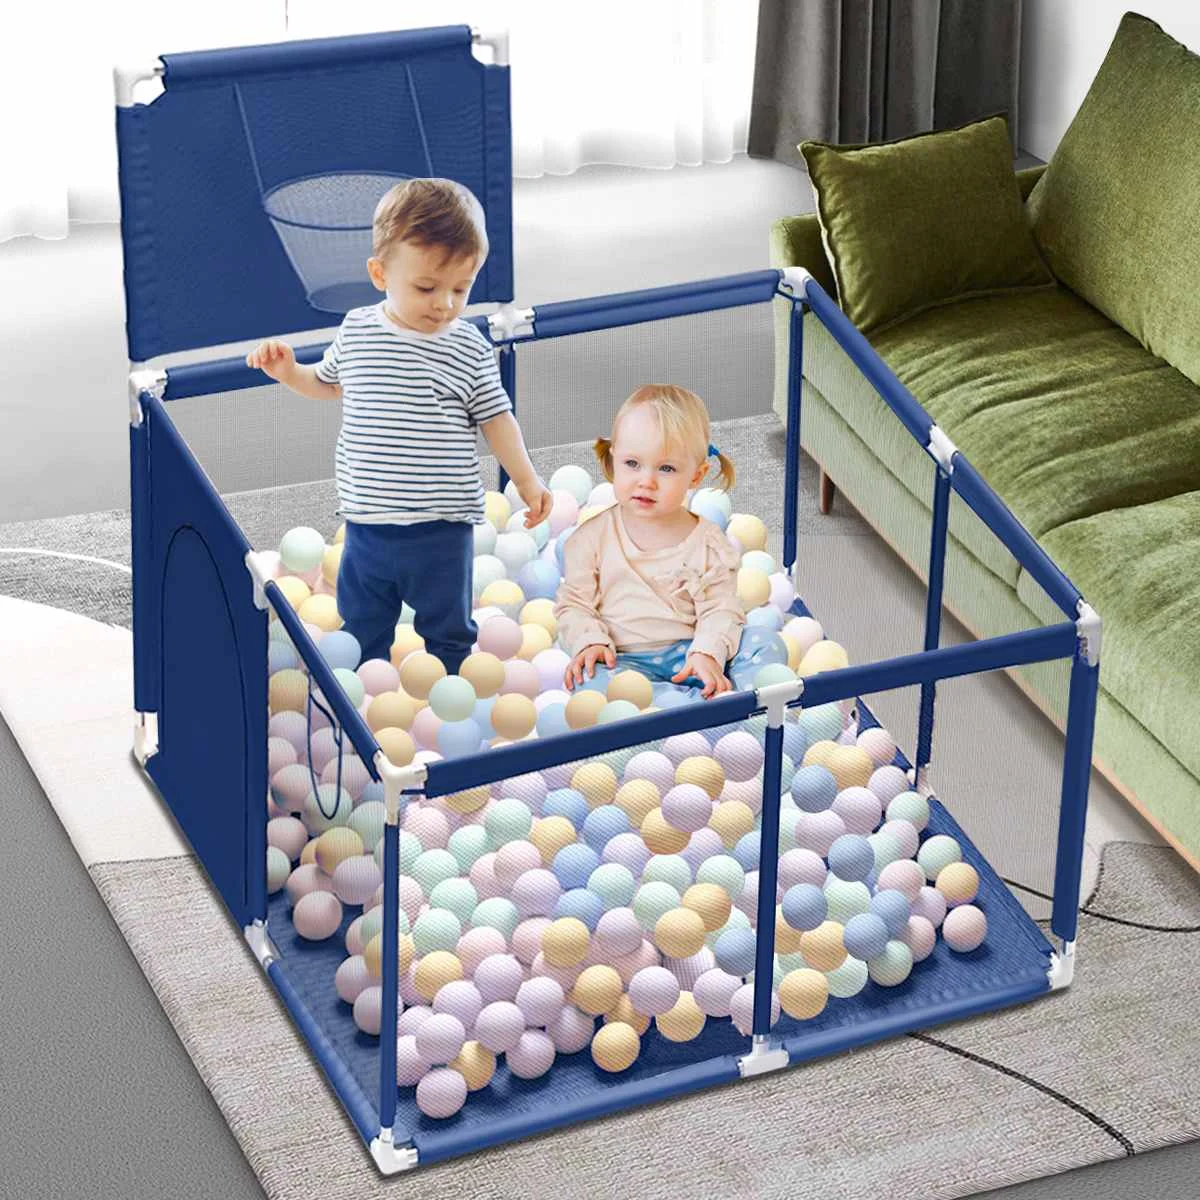 

Bioby Baby Playpen for Children Playpen Baby Fence Kids Ball Pit Pool Baby Playground Pool Ball Baby Kid Indoor Basketball Field